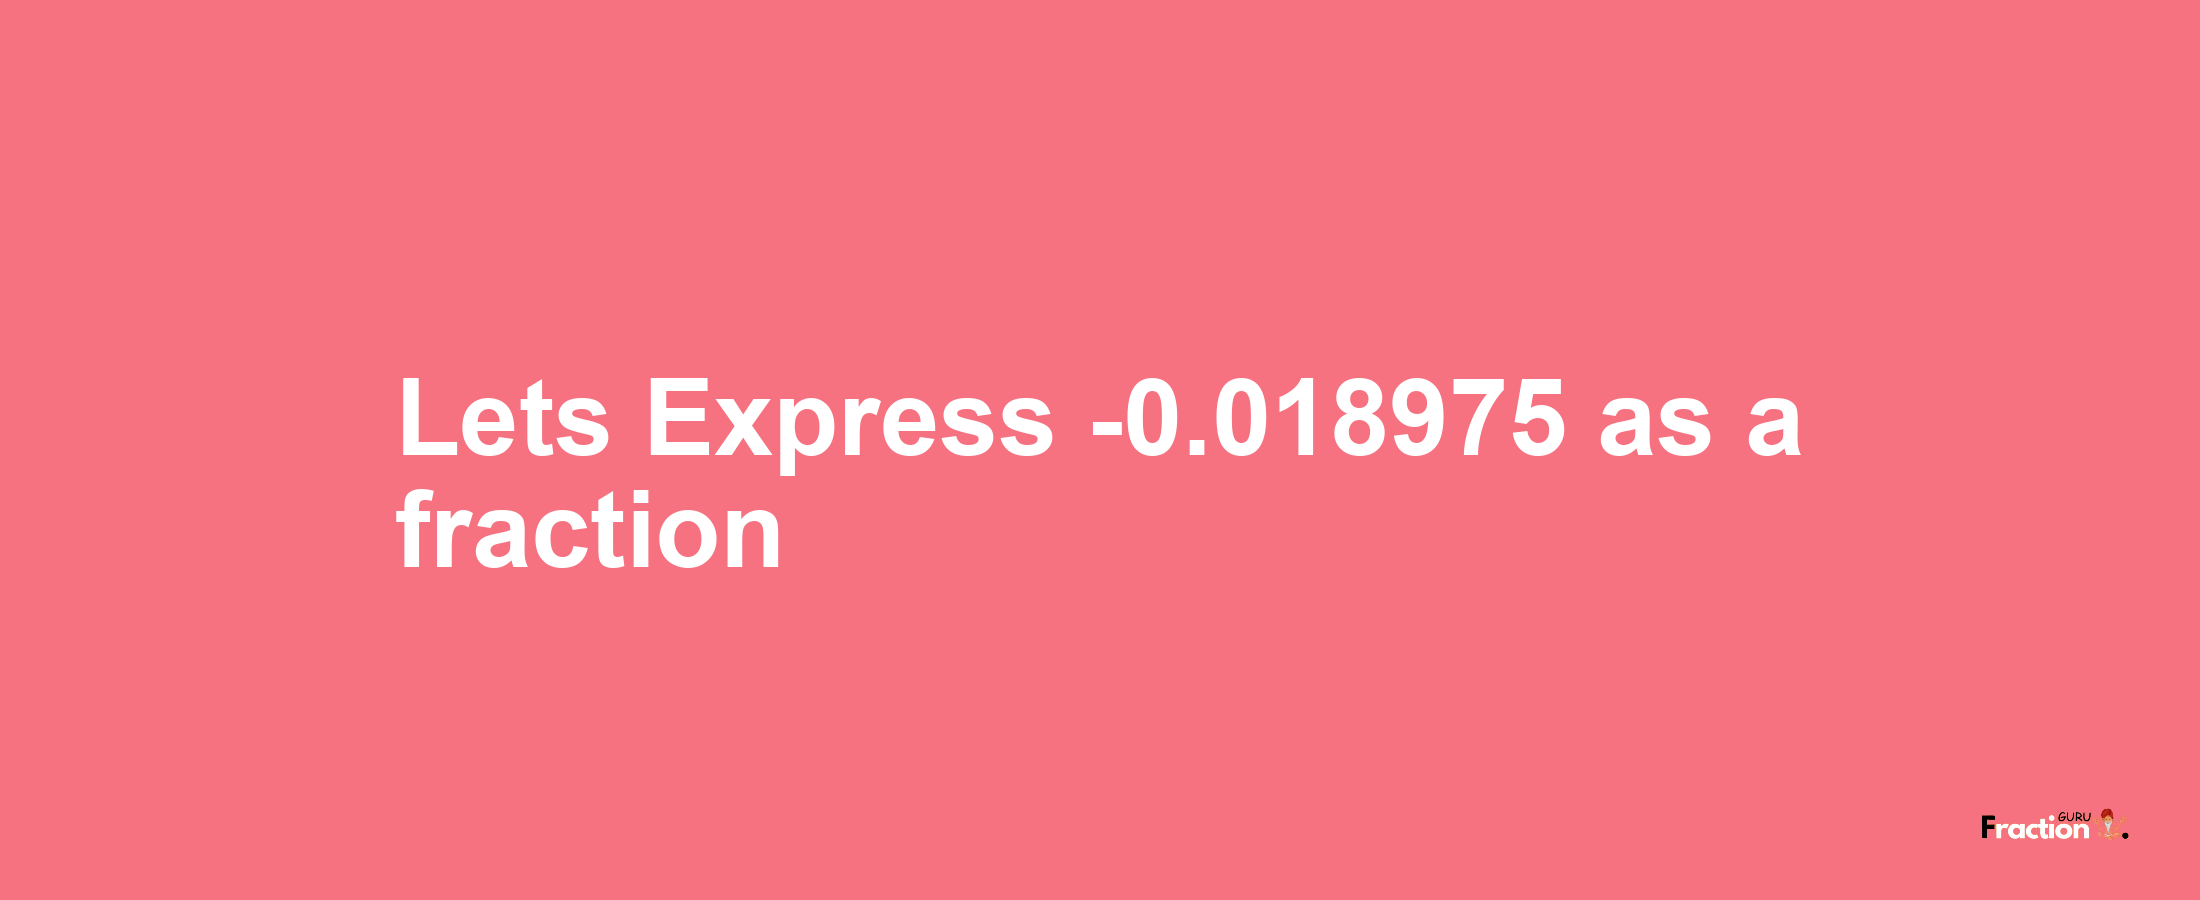 Lets Express -0.018975 as afraction